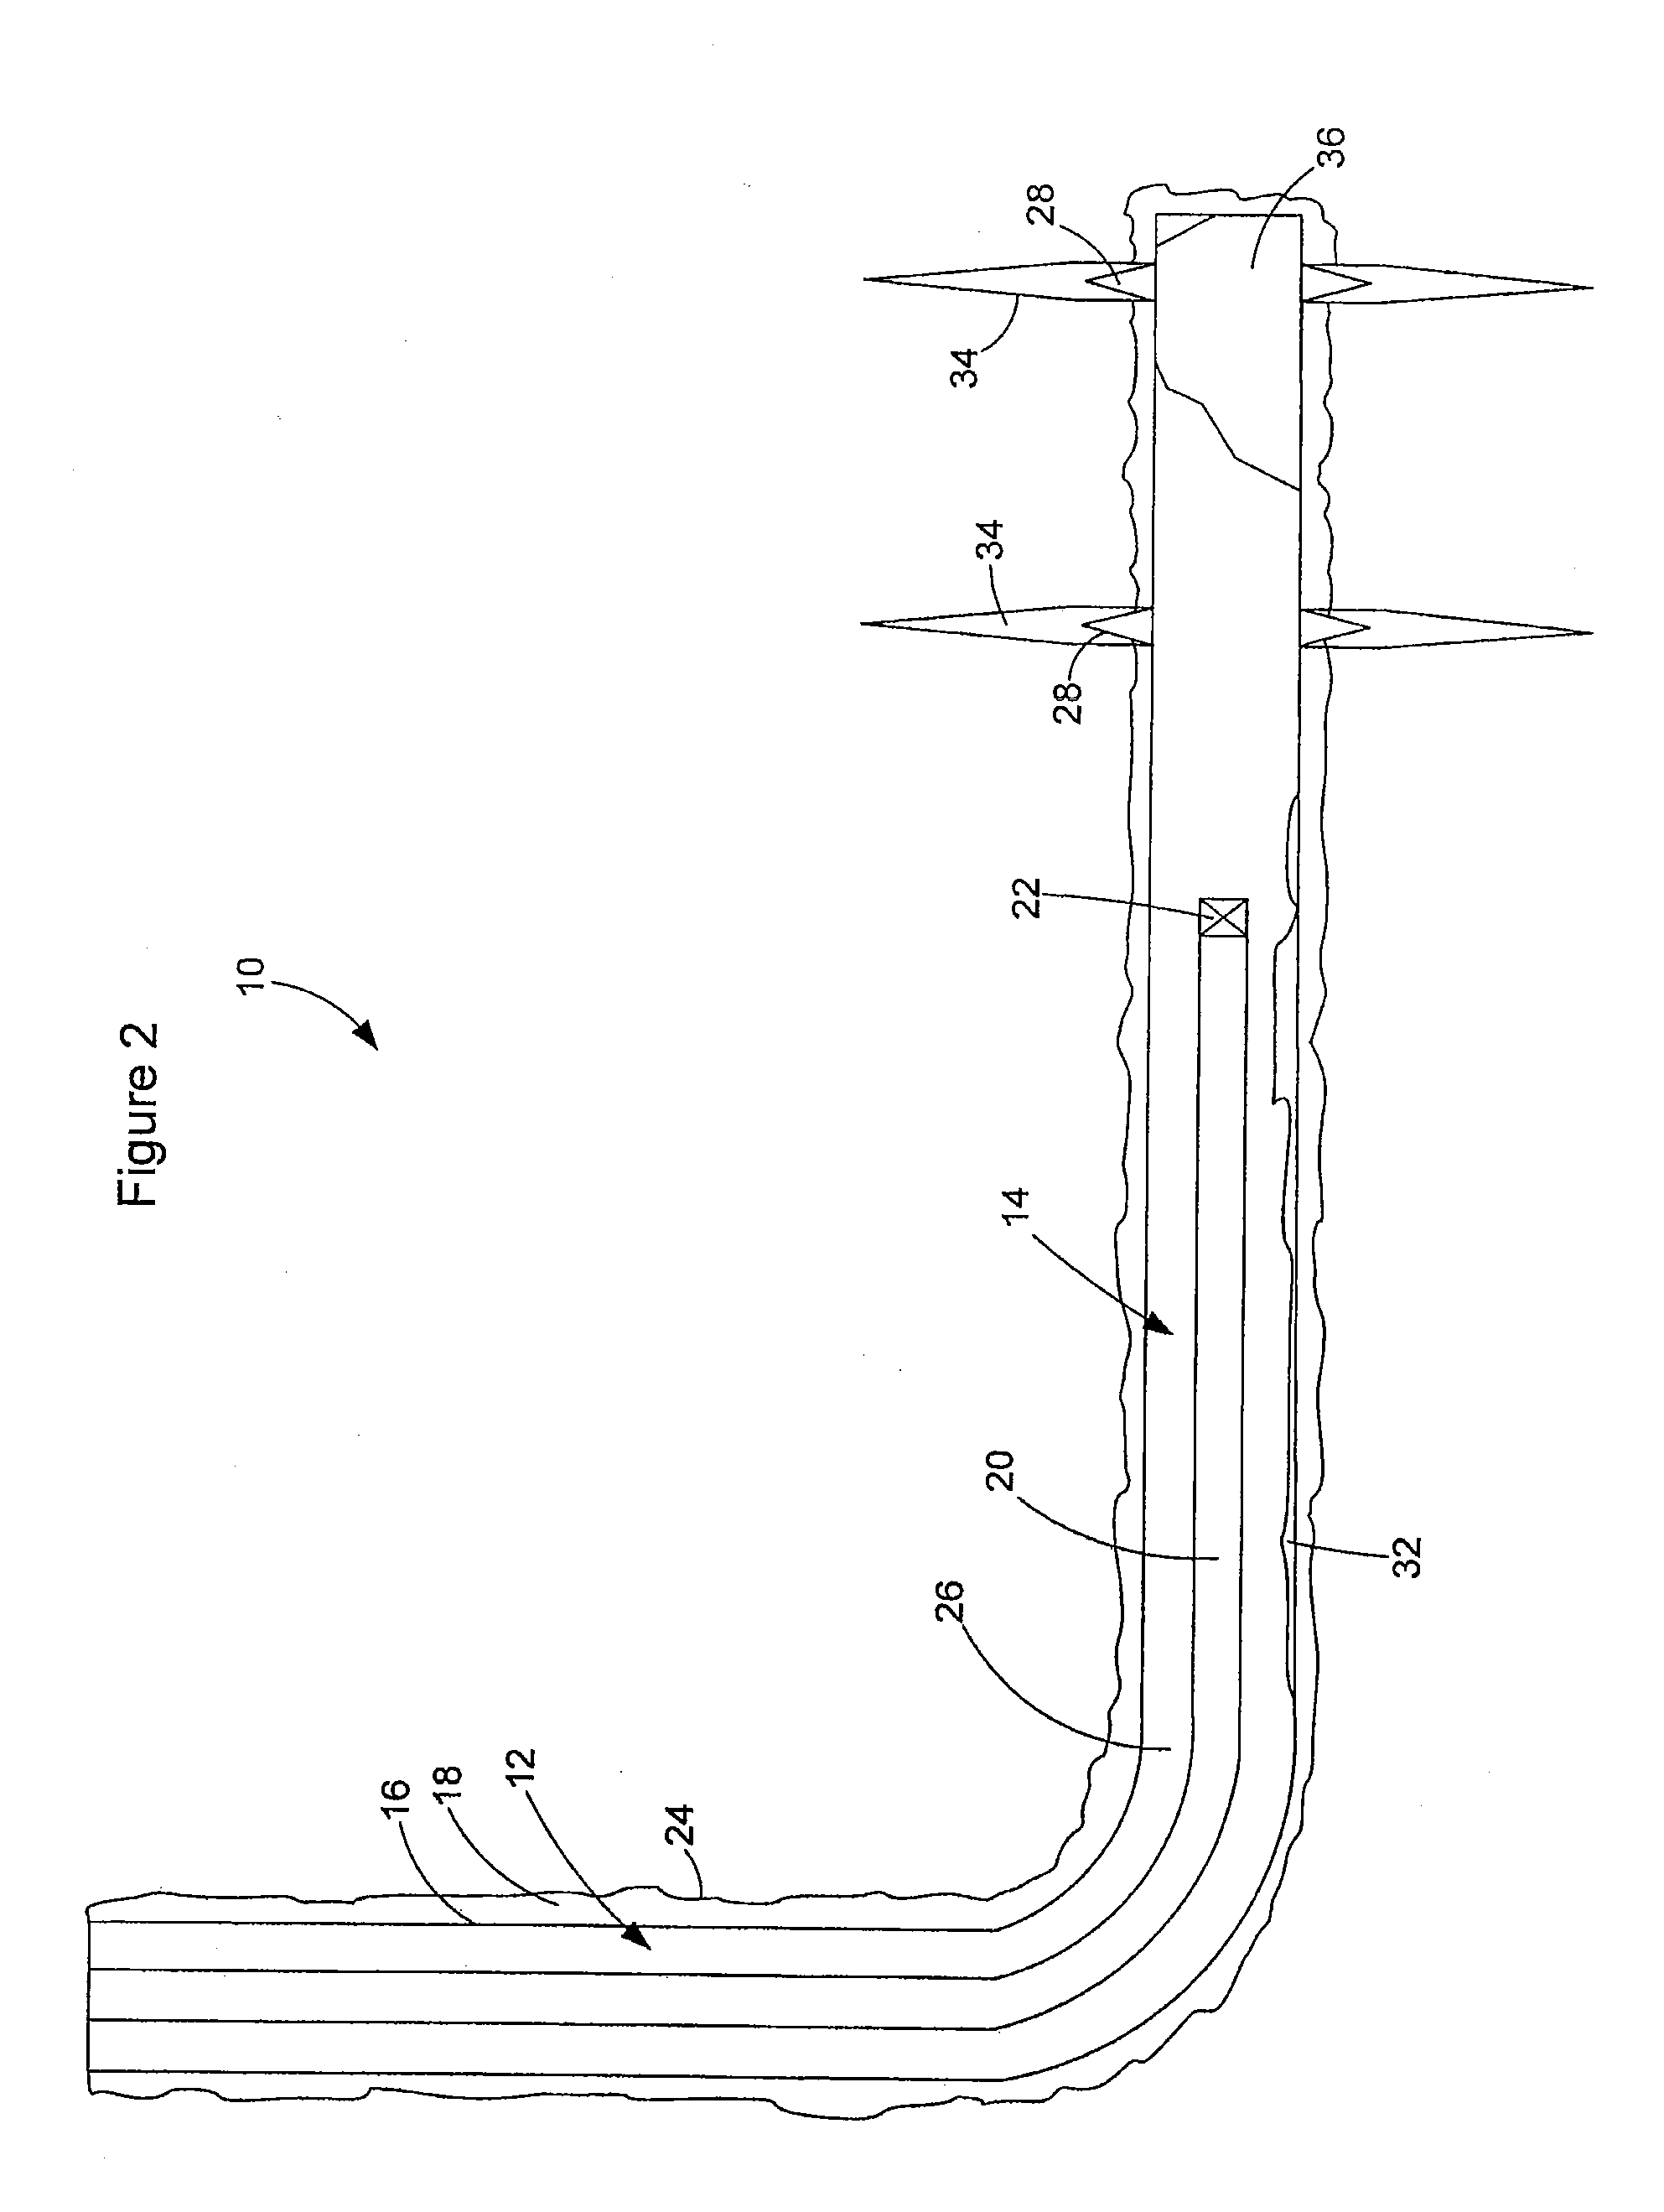 Method of hydraulically fracturing a formation